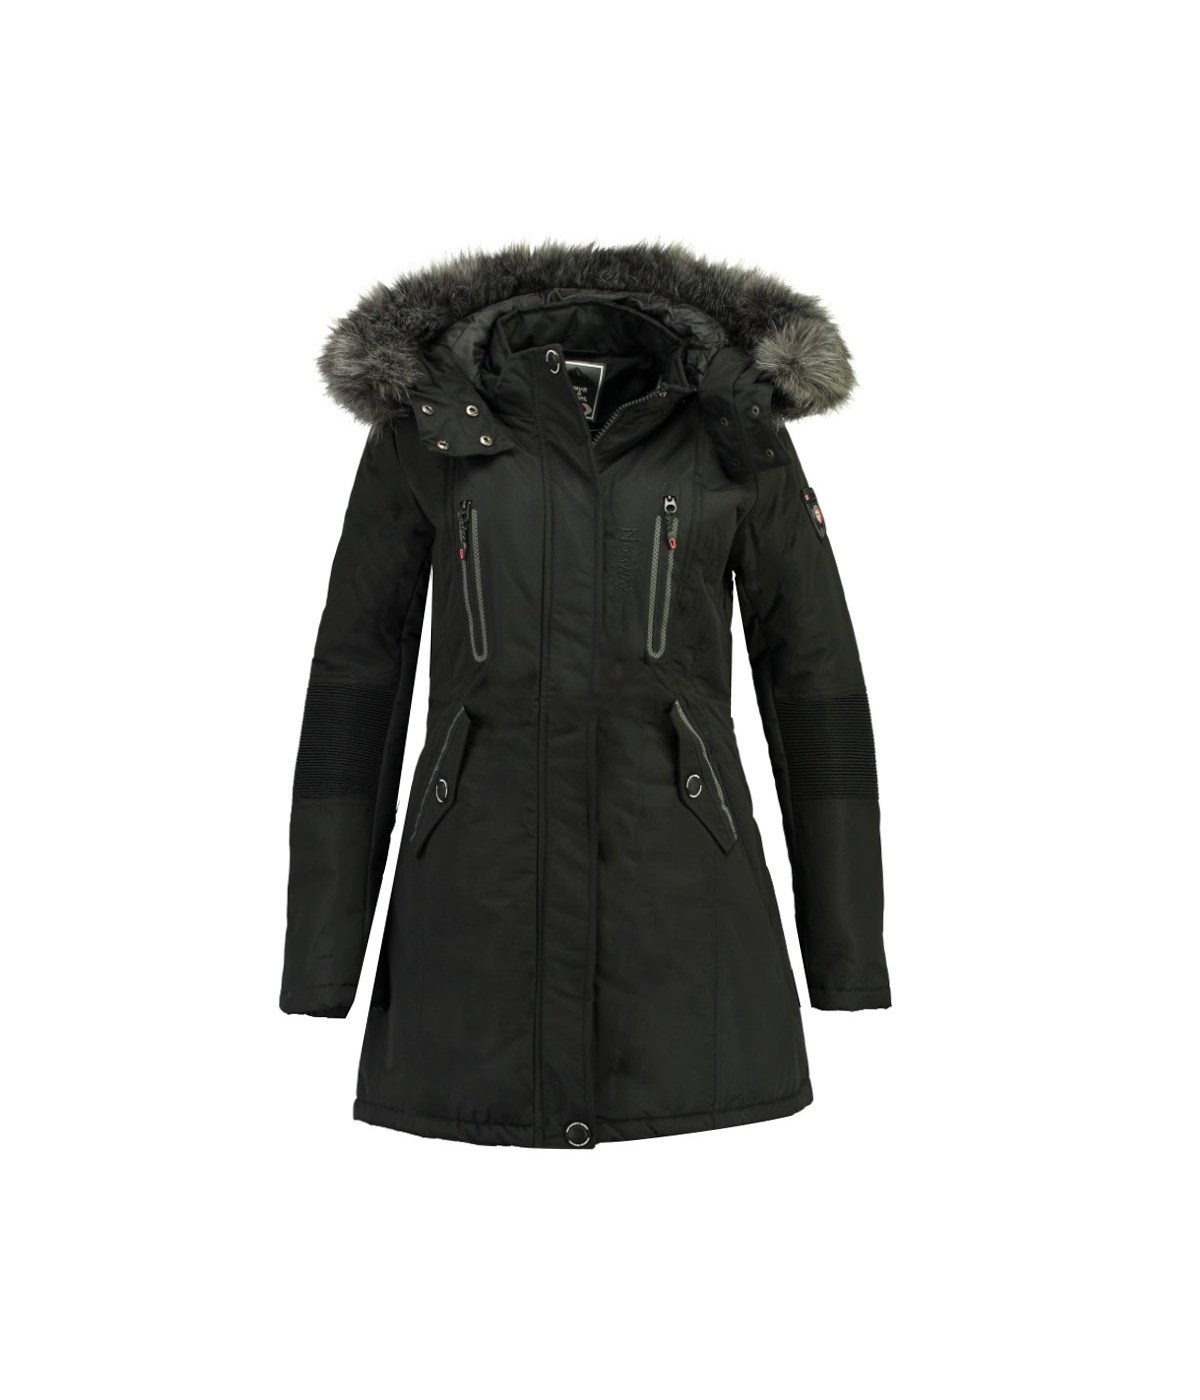 parka norway geographical femme